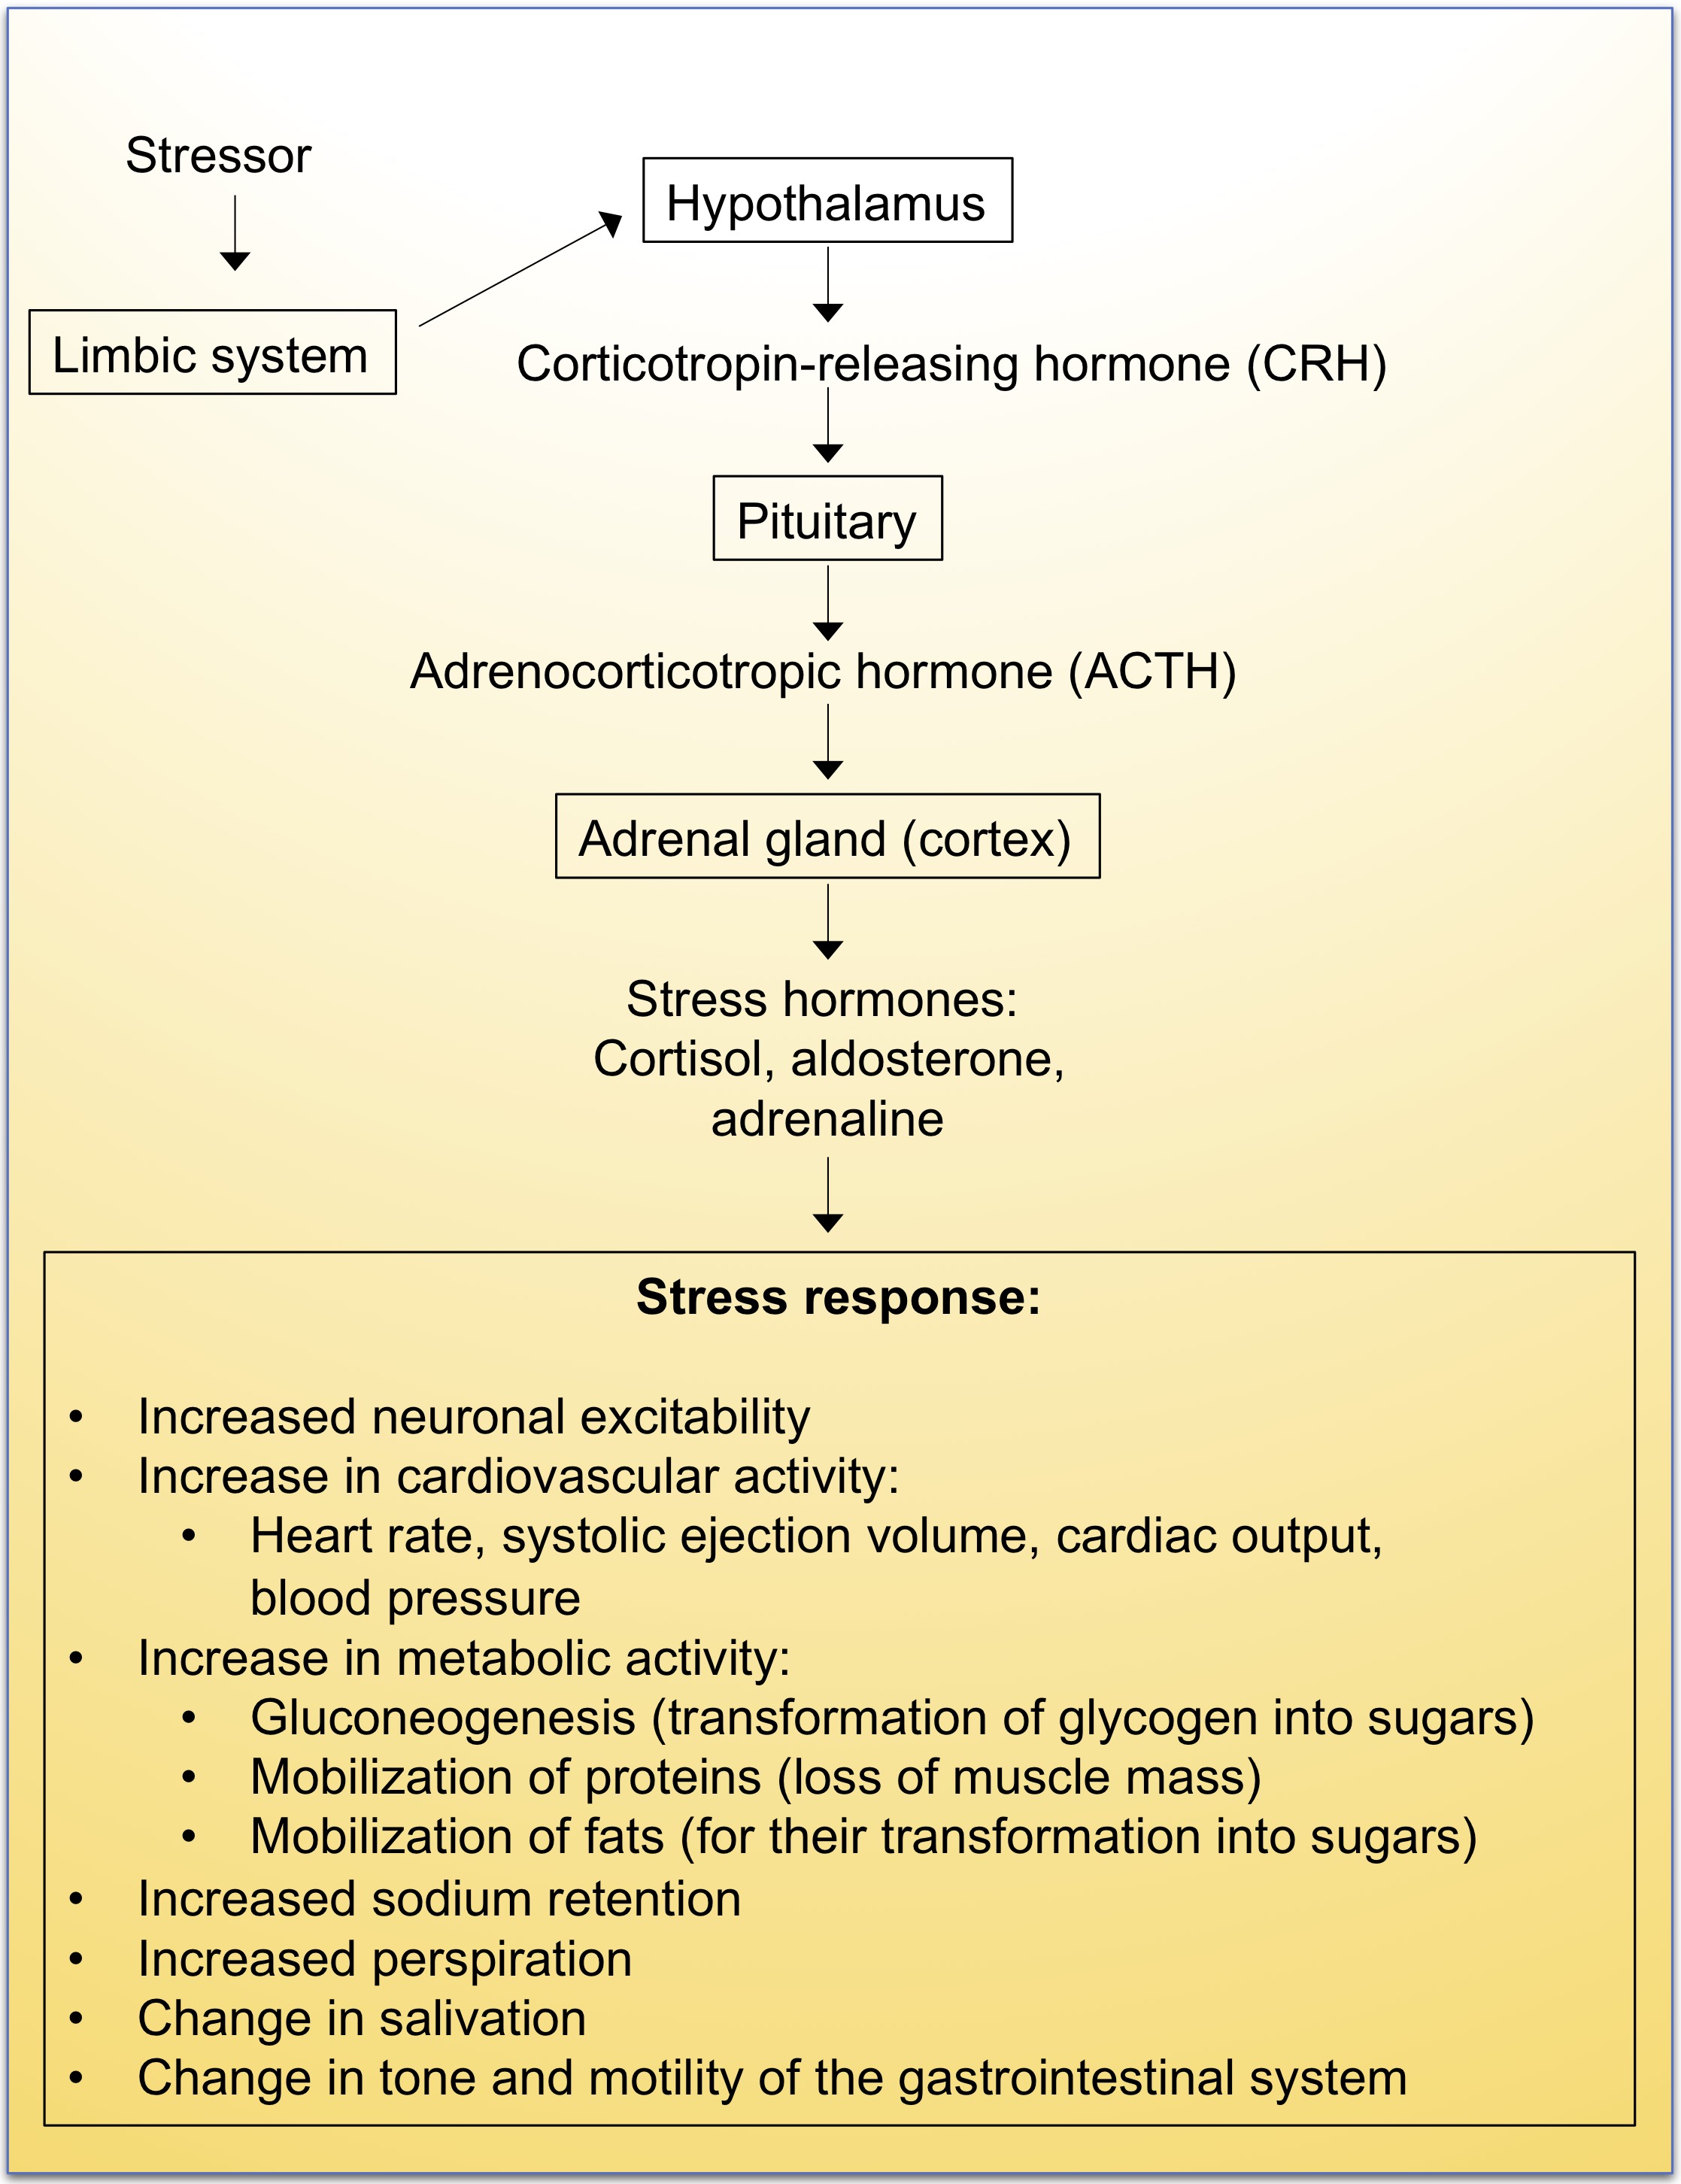 stress hormones in the research on cardiovascular effects of noise